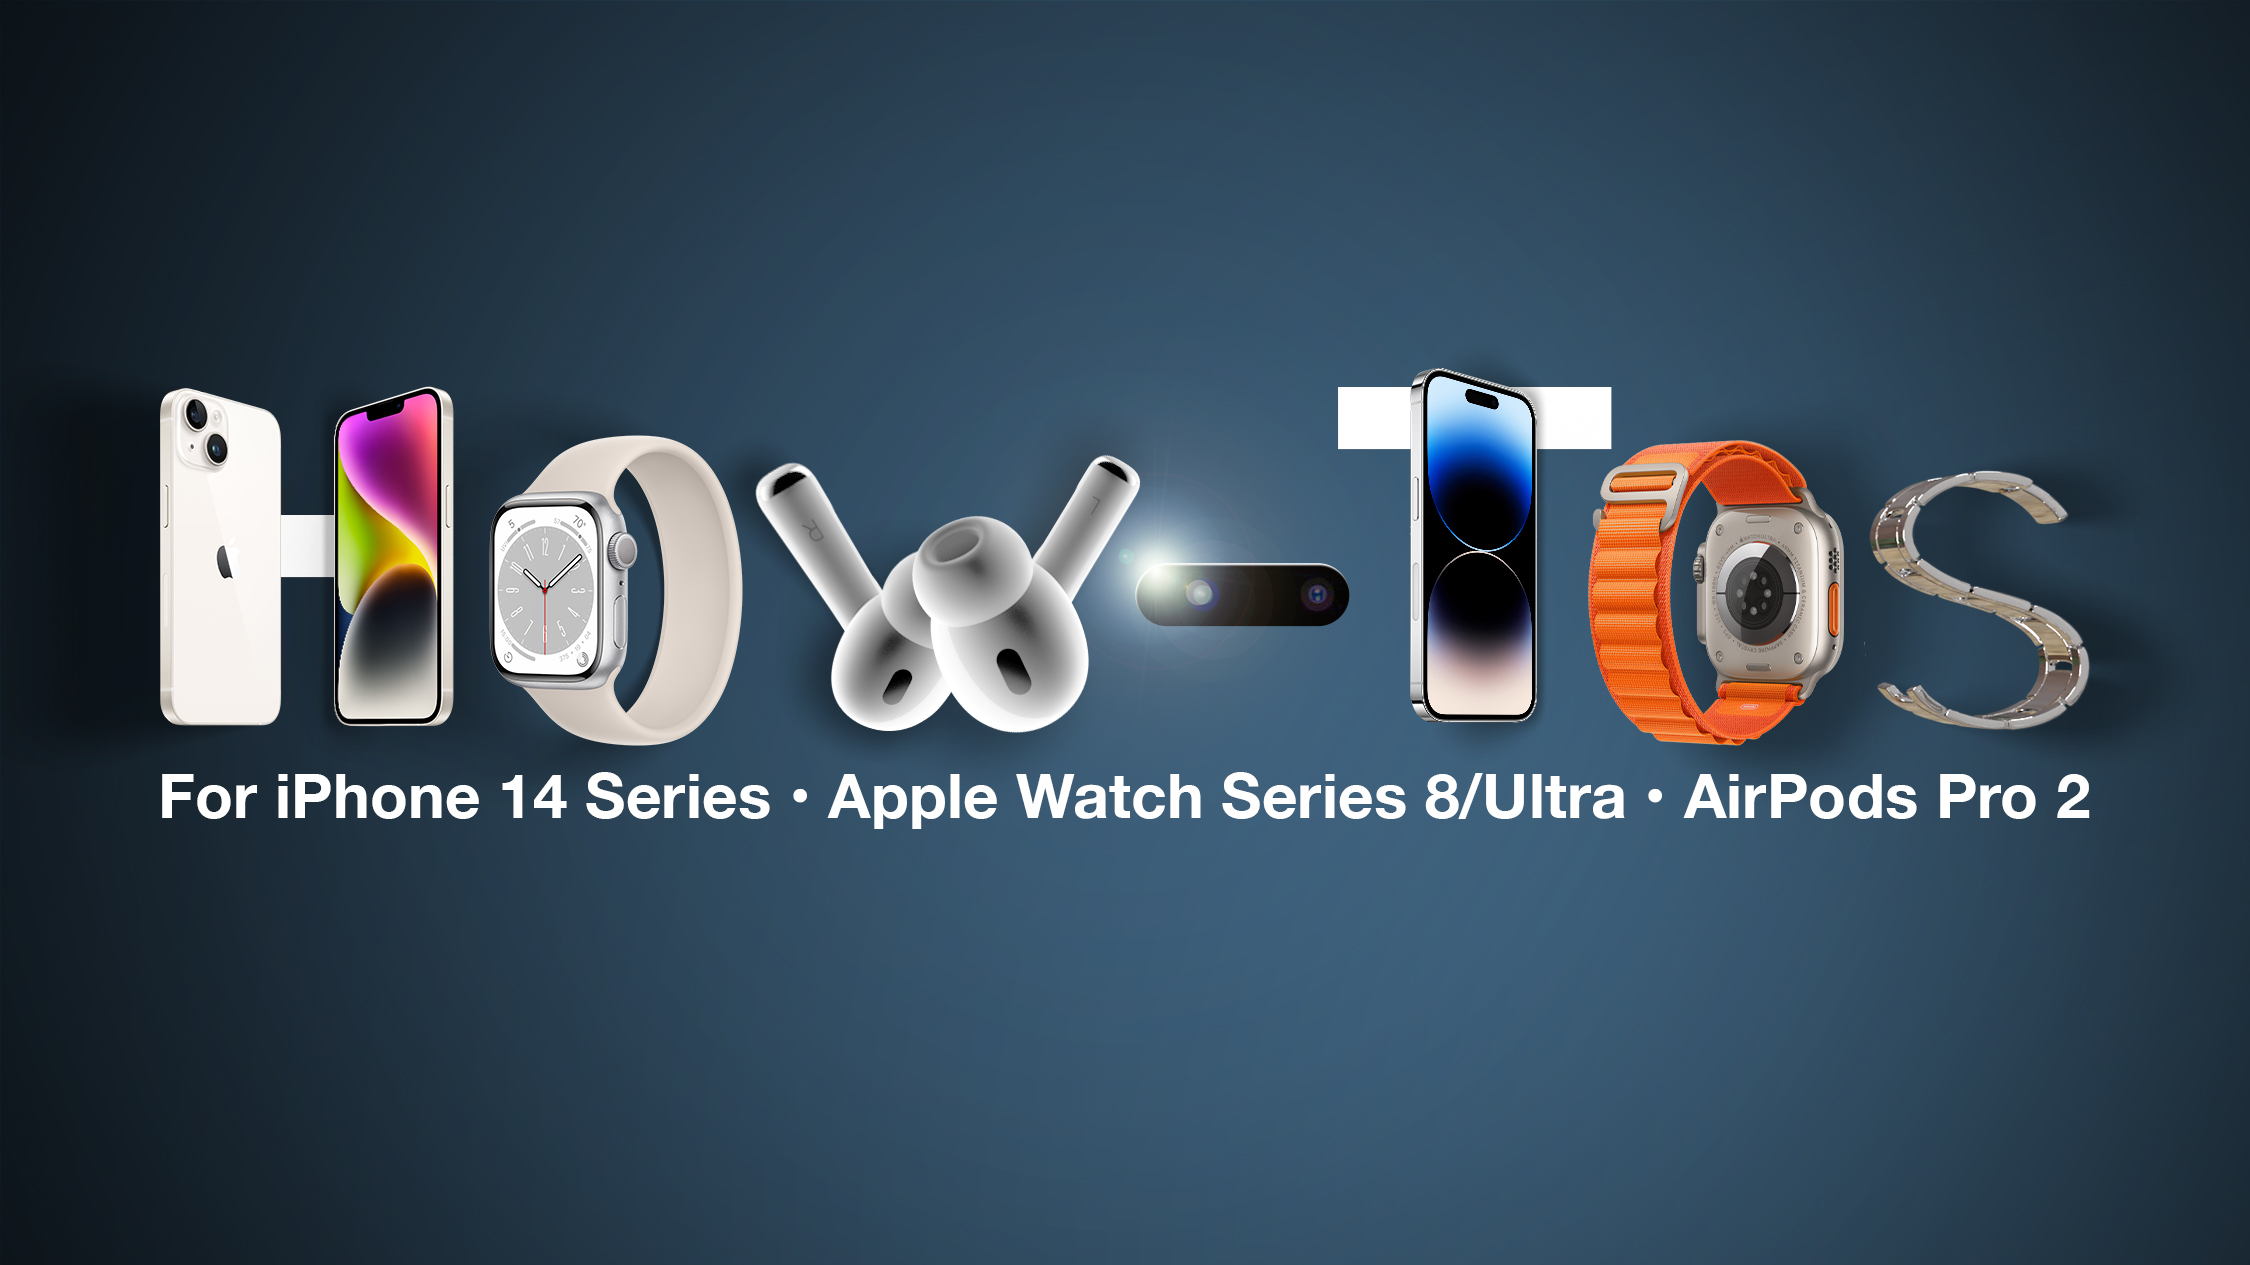 How-Tos for iPhone 14 Series, Apple Watch Series 8/Ultra, and AirPods Pro 2